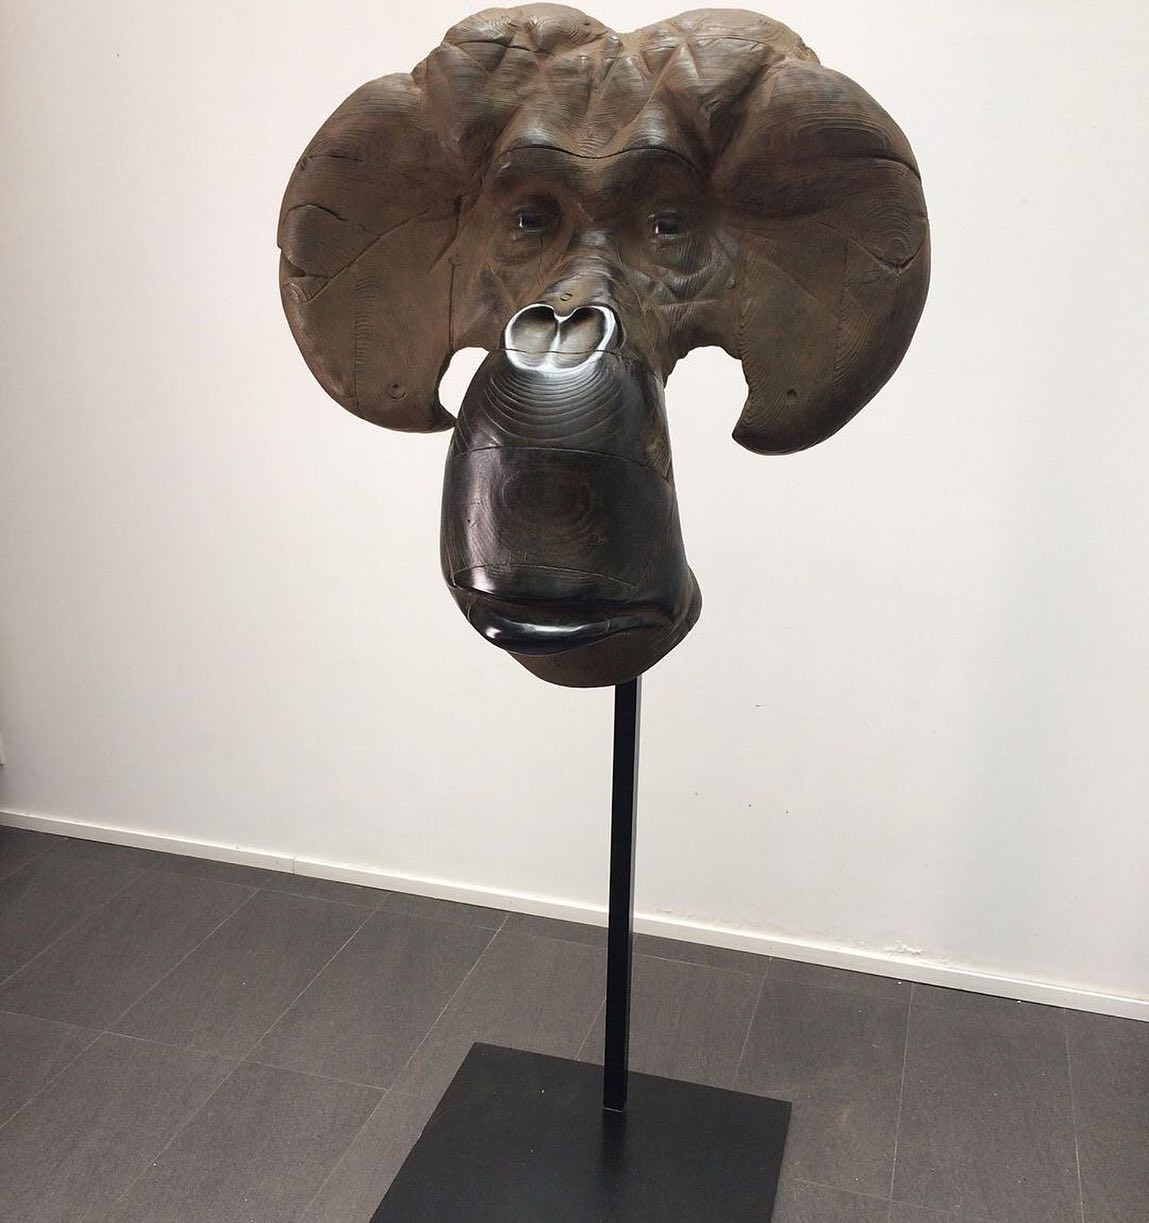 Trophy, Thought Provoking Giant Animal Sculptures By Quentin Garel (7)